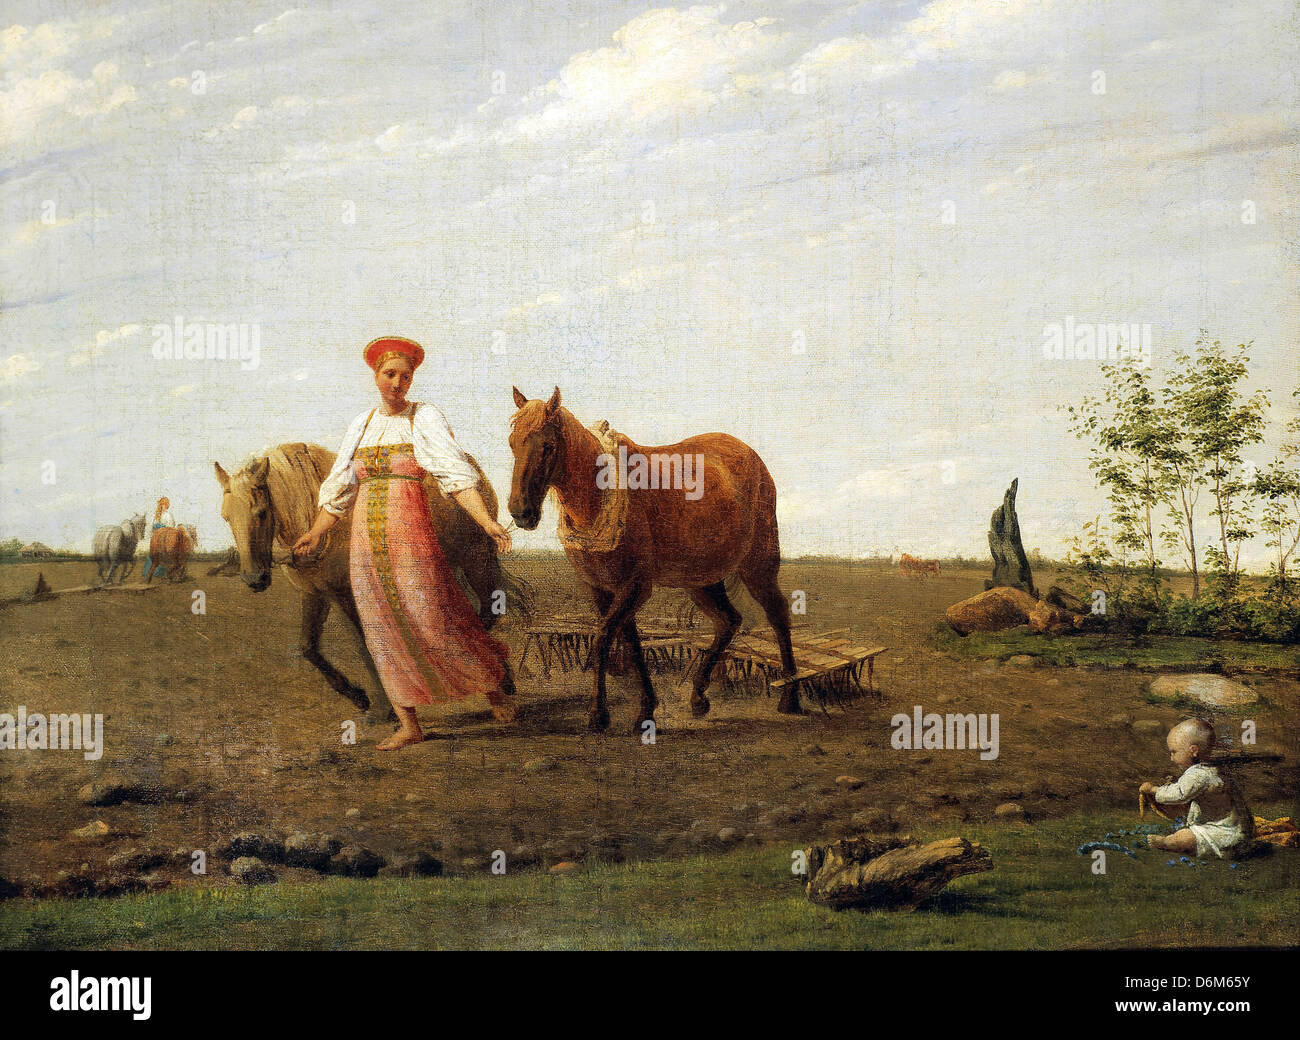 Alexey Venetsianov, In the ploughed field. Spring 1820s Oil on canvas. Tretyakov Gallery, Moscow, Russia Stock Photo